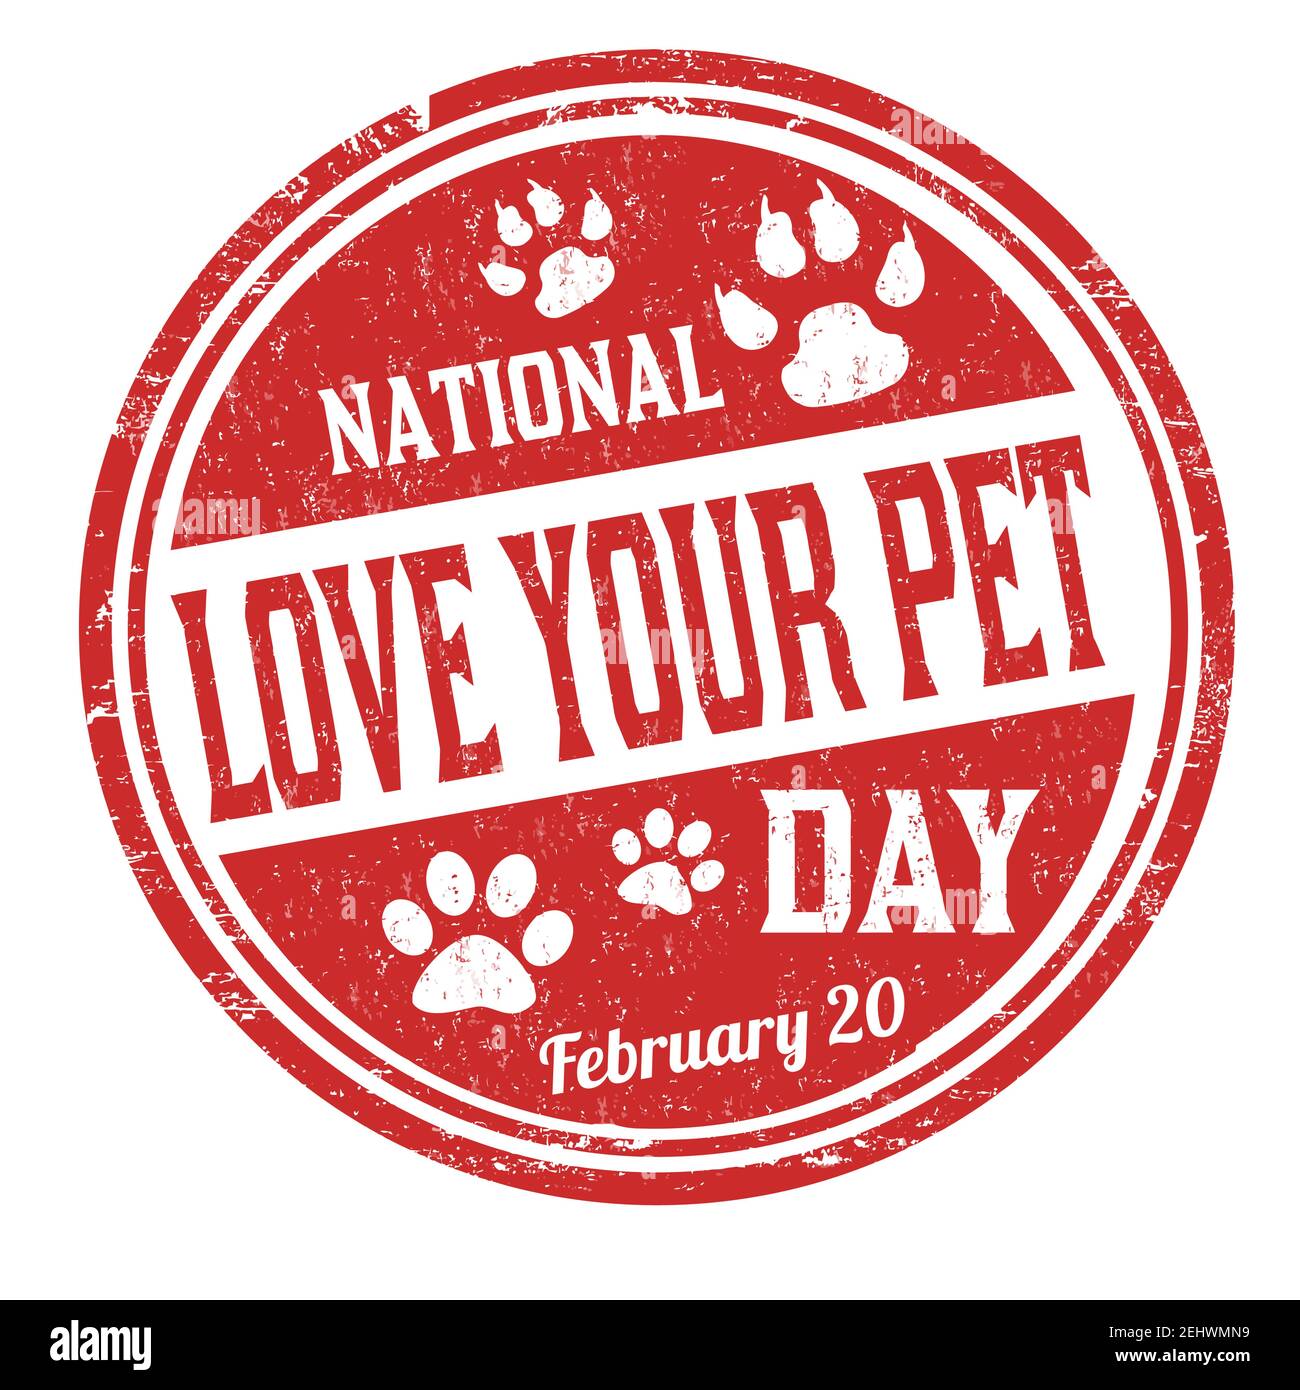 National love your pet day grunge rubber stamp on white background